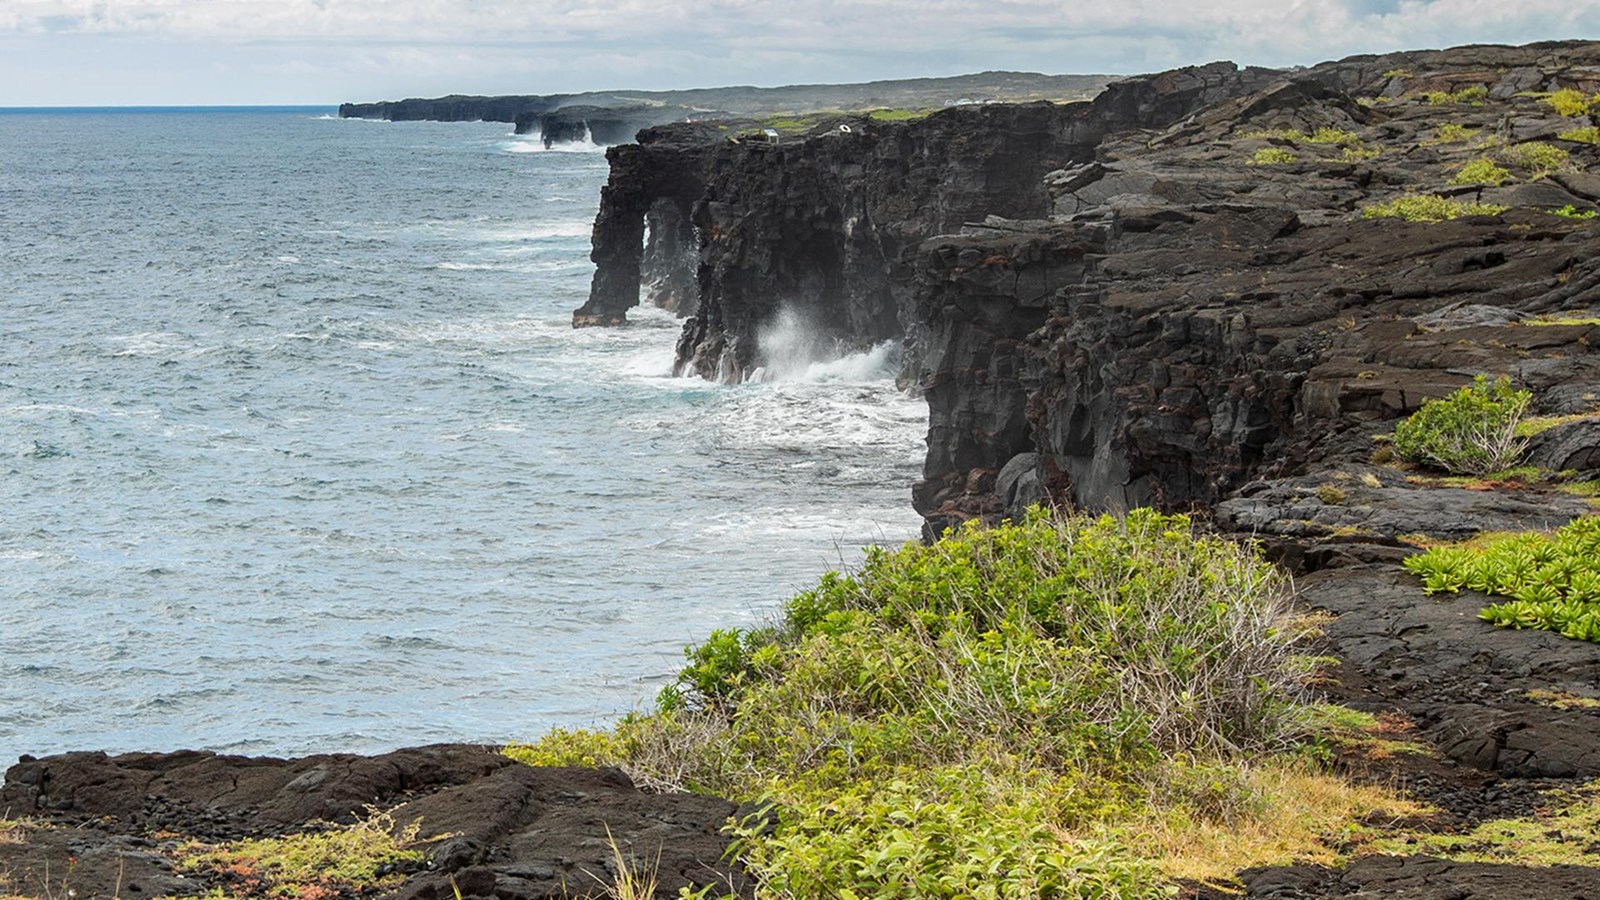 A sea arch extending into the ocean from black cliffs with a bush in the foreground